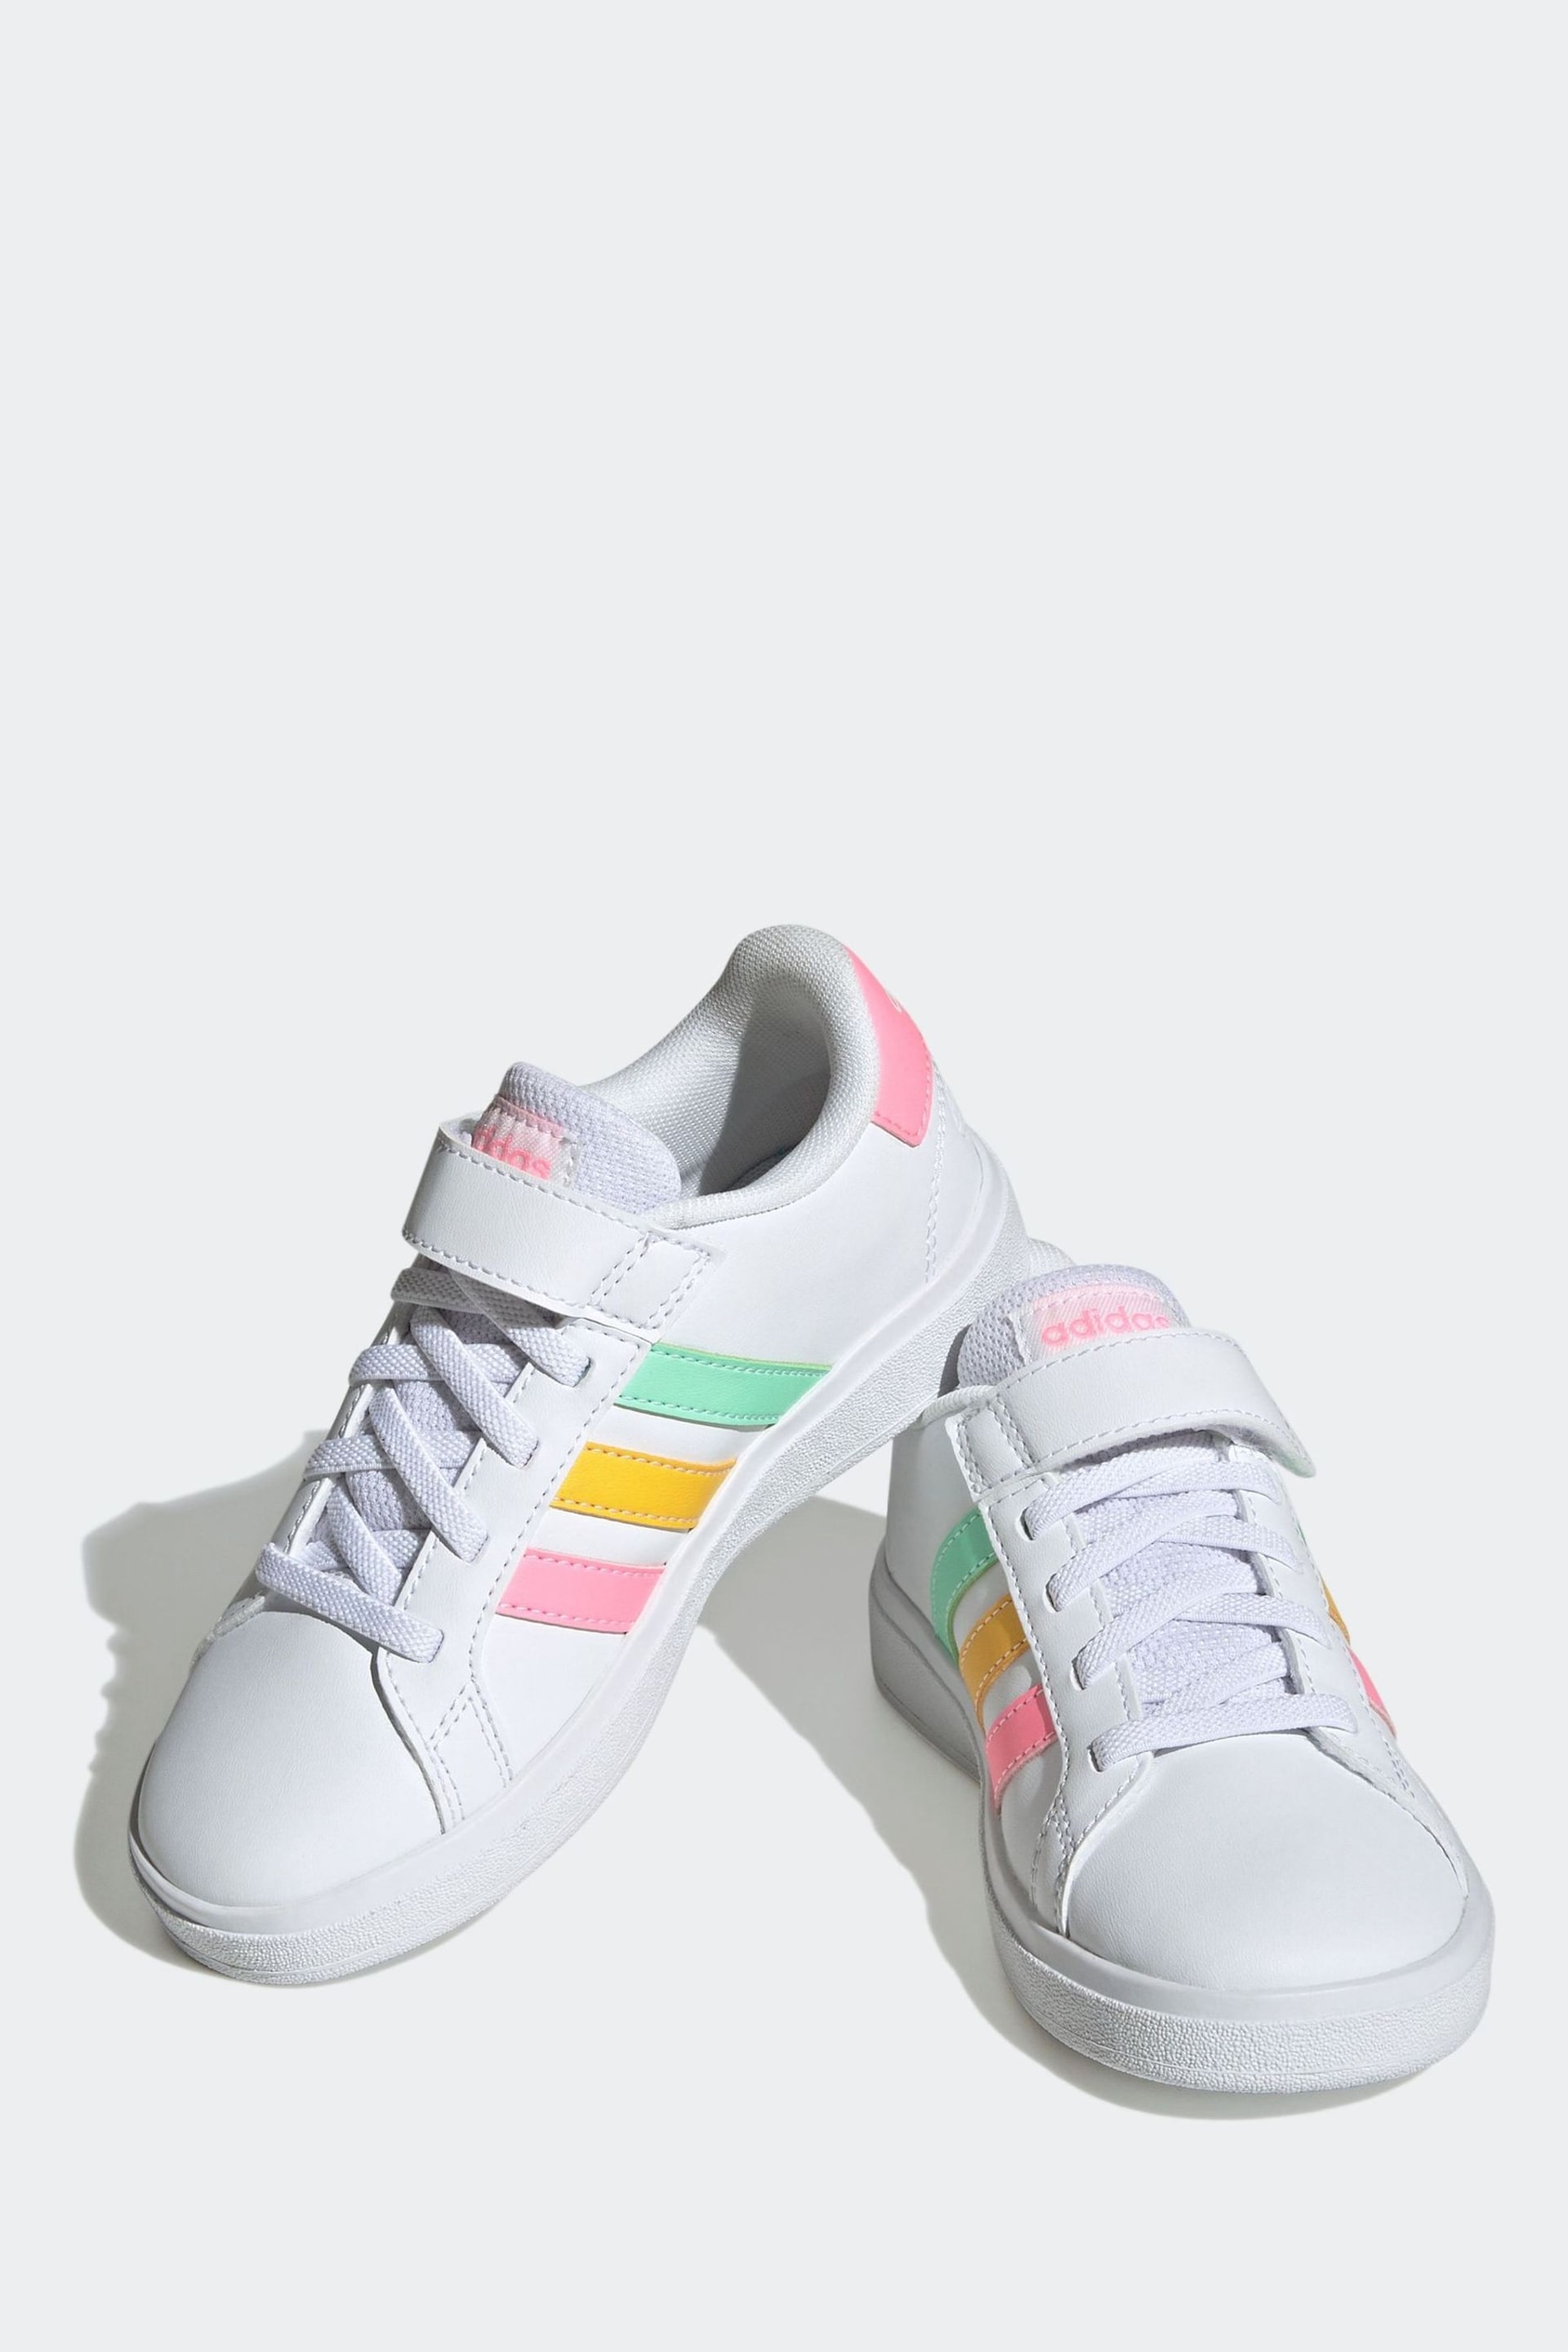 adidas White/Pink Sportswear Kids Grand Court Elastic Lace and Top Strap Trainers - Image 4 of 9